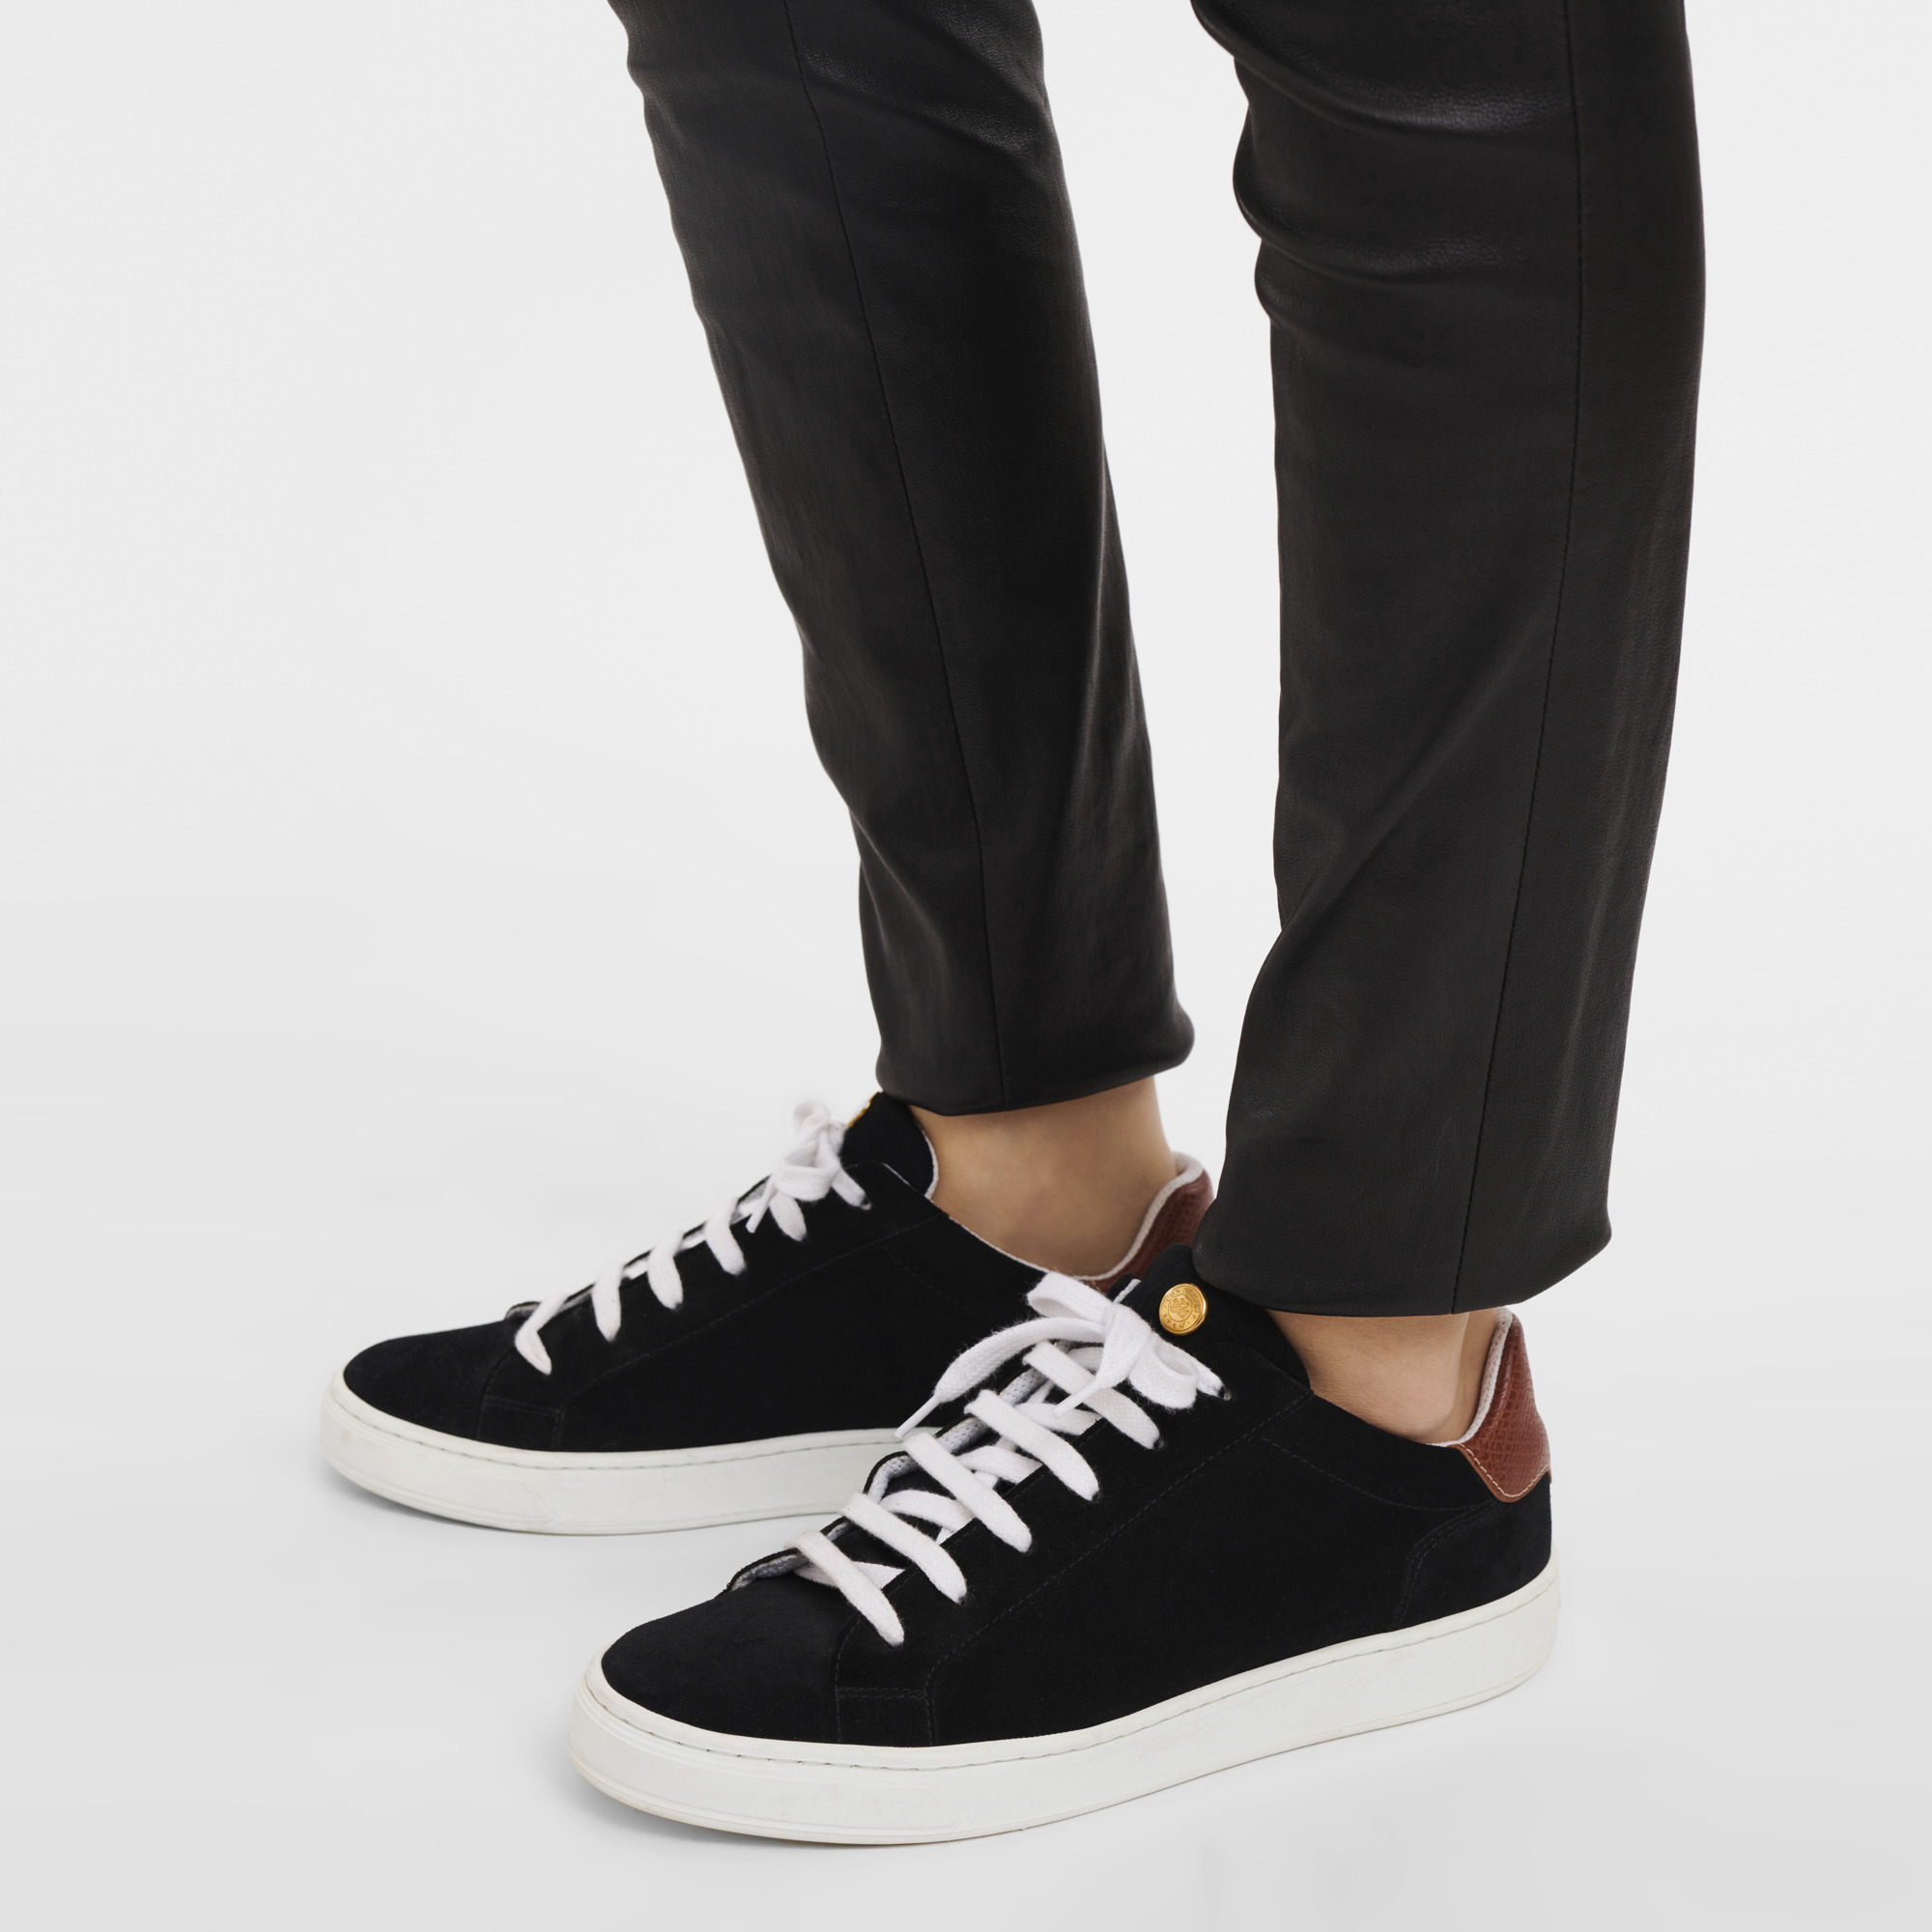 Spring/Summer 2023 Collection Sneakers Black - Leather - 2